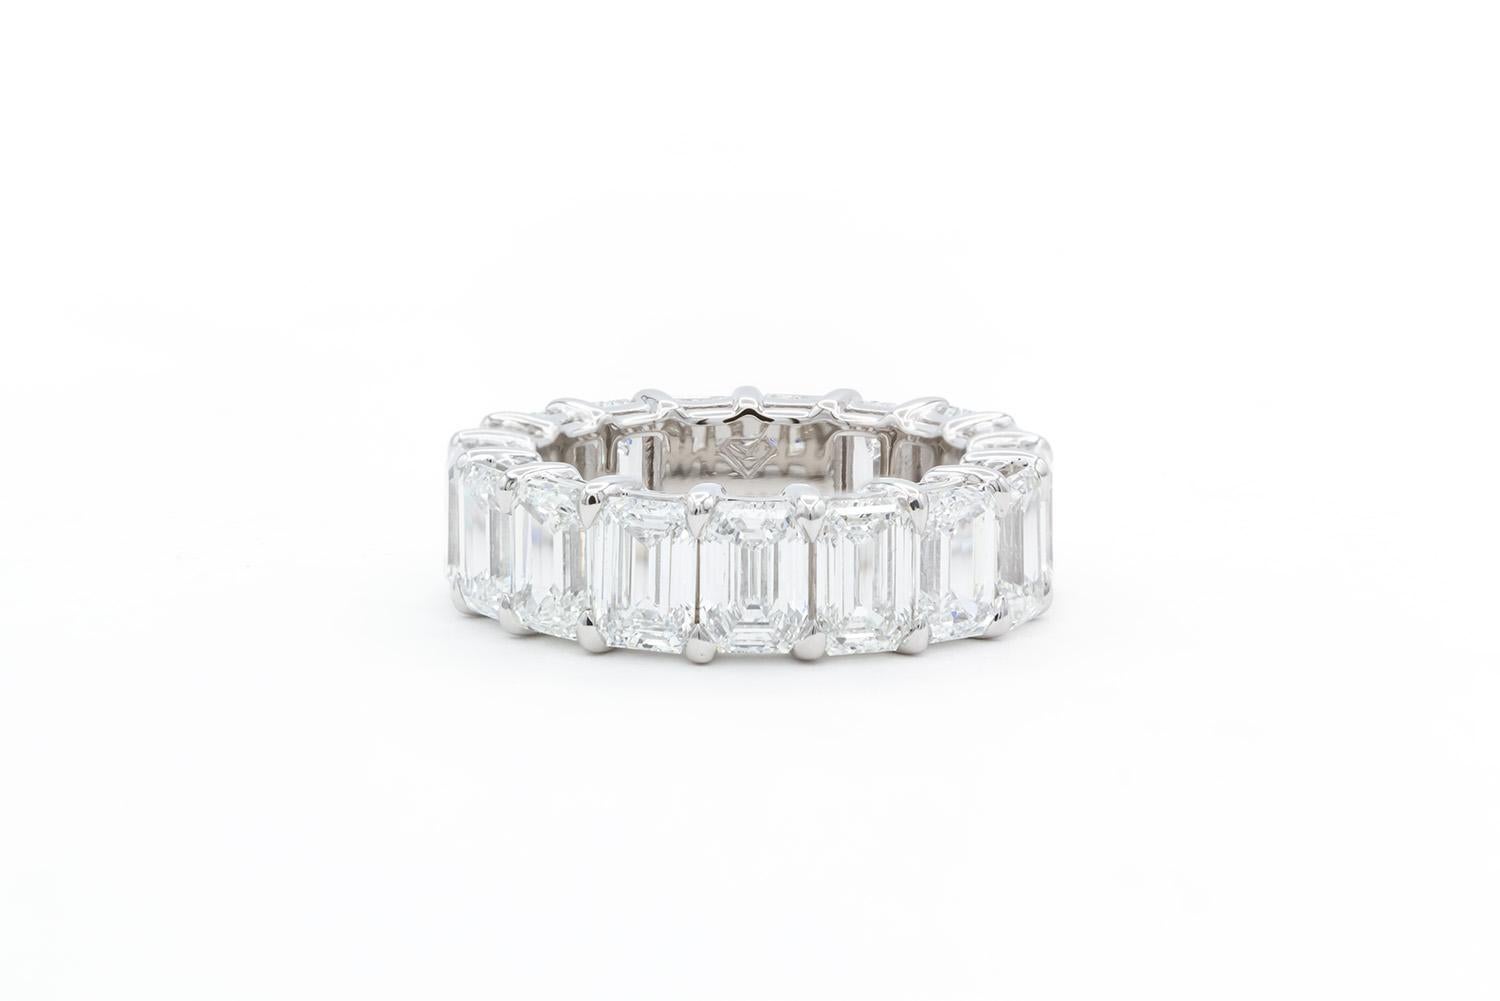 We are pleased to offer this Brand New Unworn GIA Certified Platinum & Emerald Cut Diamond Eternity Band. This stunningly beautiful eternity band features 17 individual GIA certified and laser inscribed emerald cut diamonds all set in a platinum